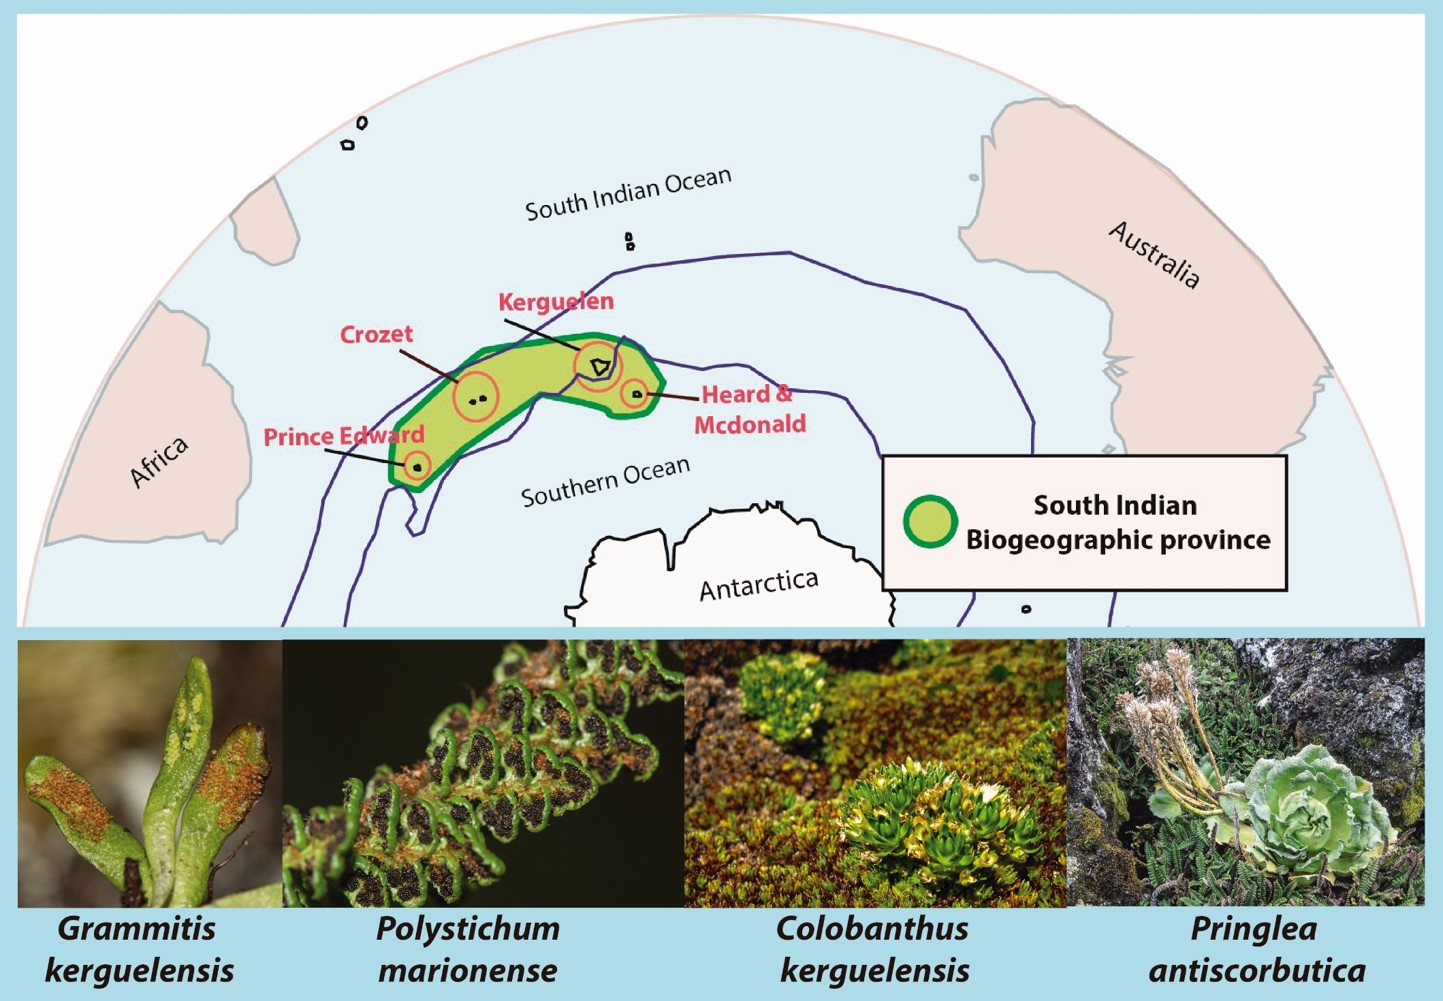 Species of the South Indian Biogeographic Province